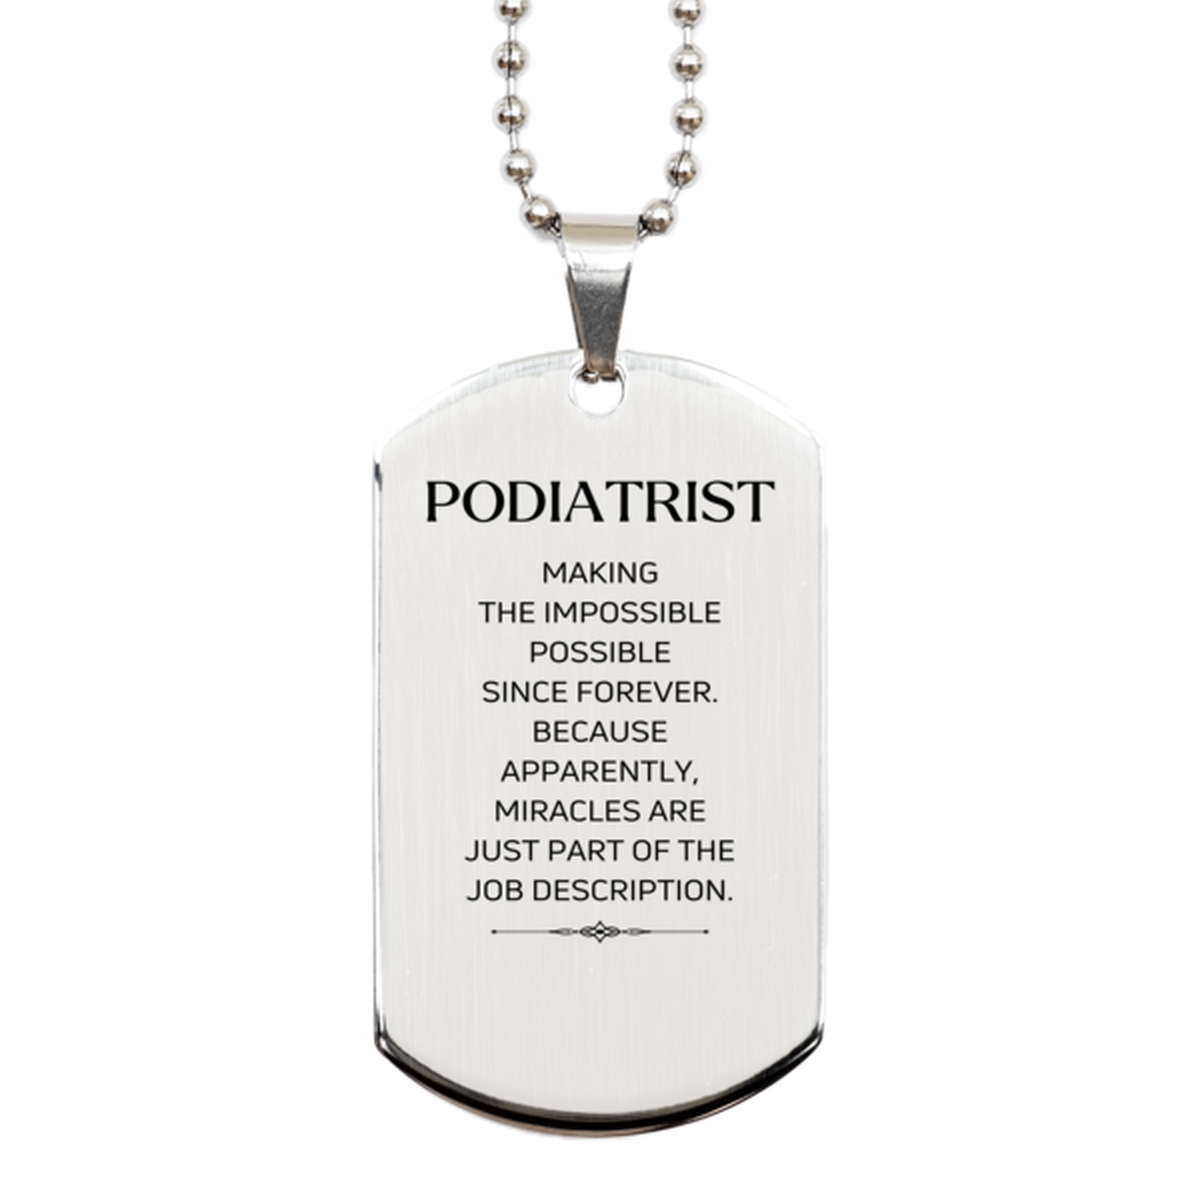 Funny Podiatrist Gifts, Miracles are just part of the job description, Inspirational Birthday Silver Dog Tag For Podiatrist, Men, Women, Coworkers, Friends, Boss